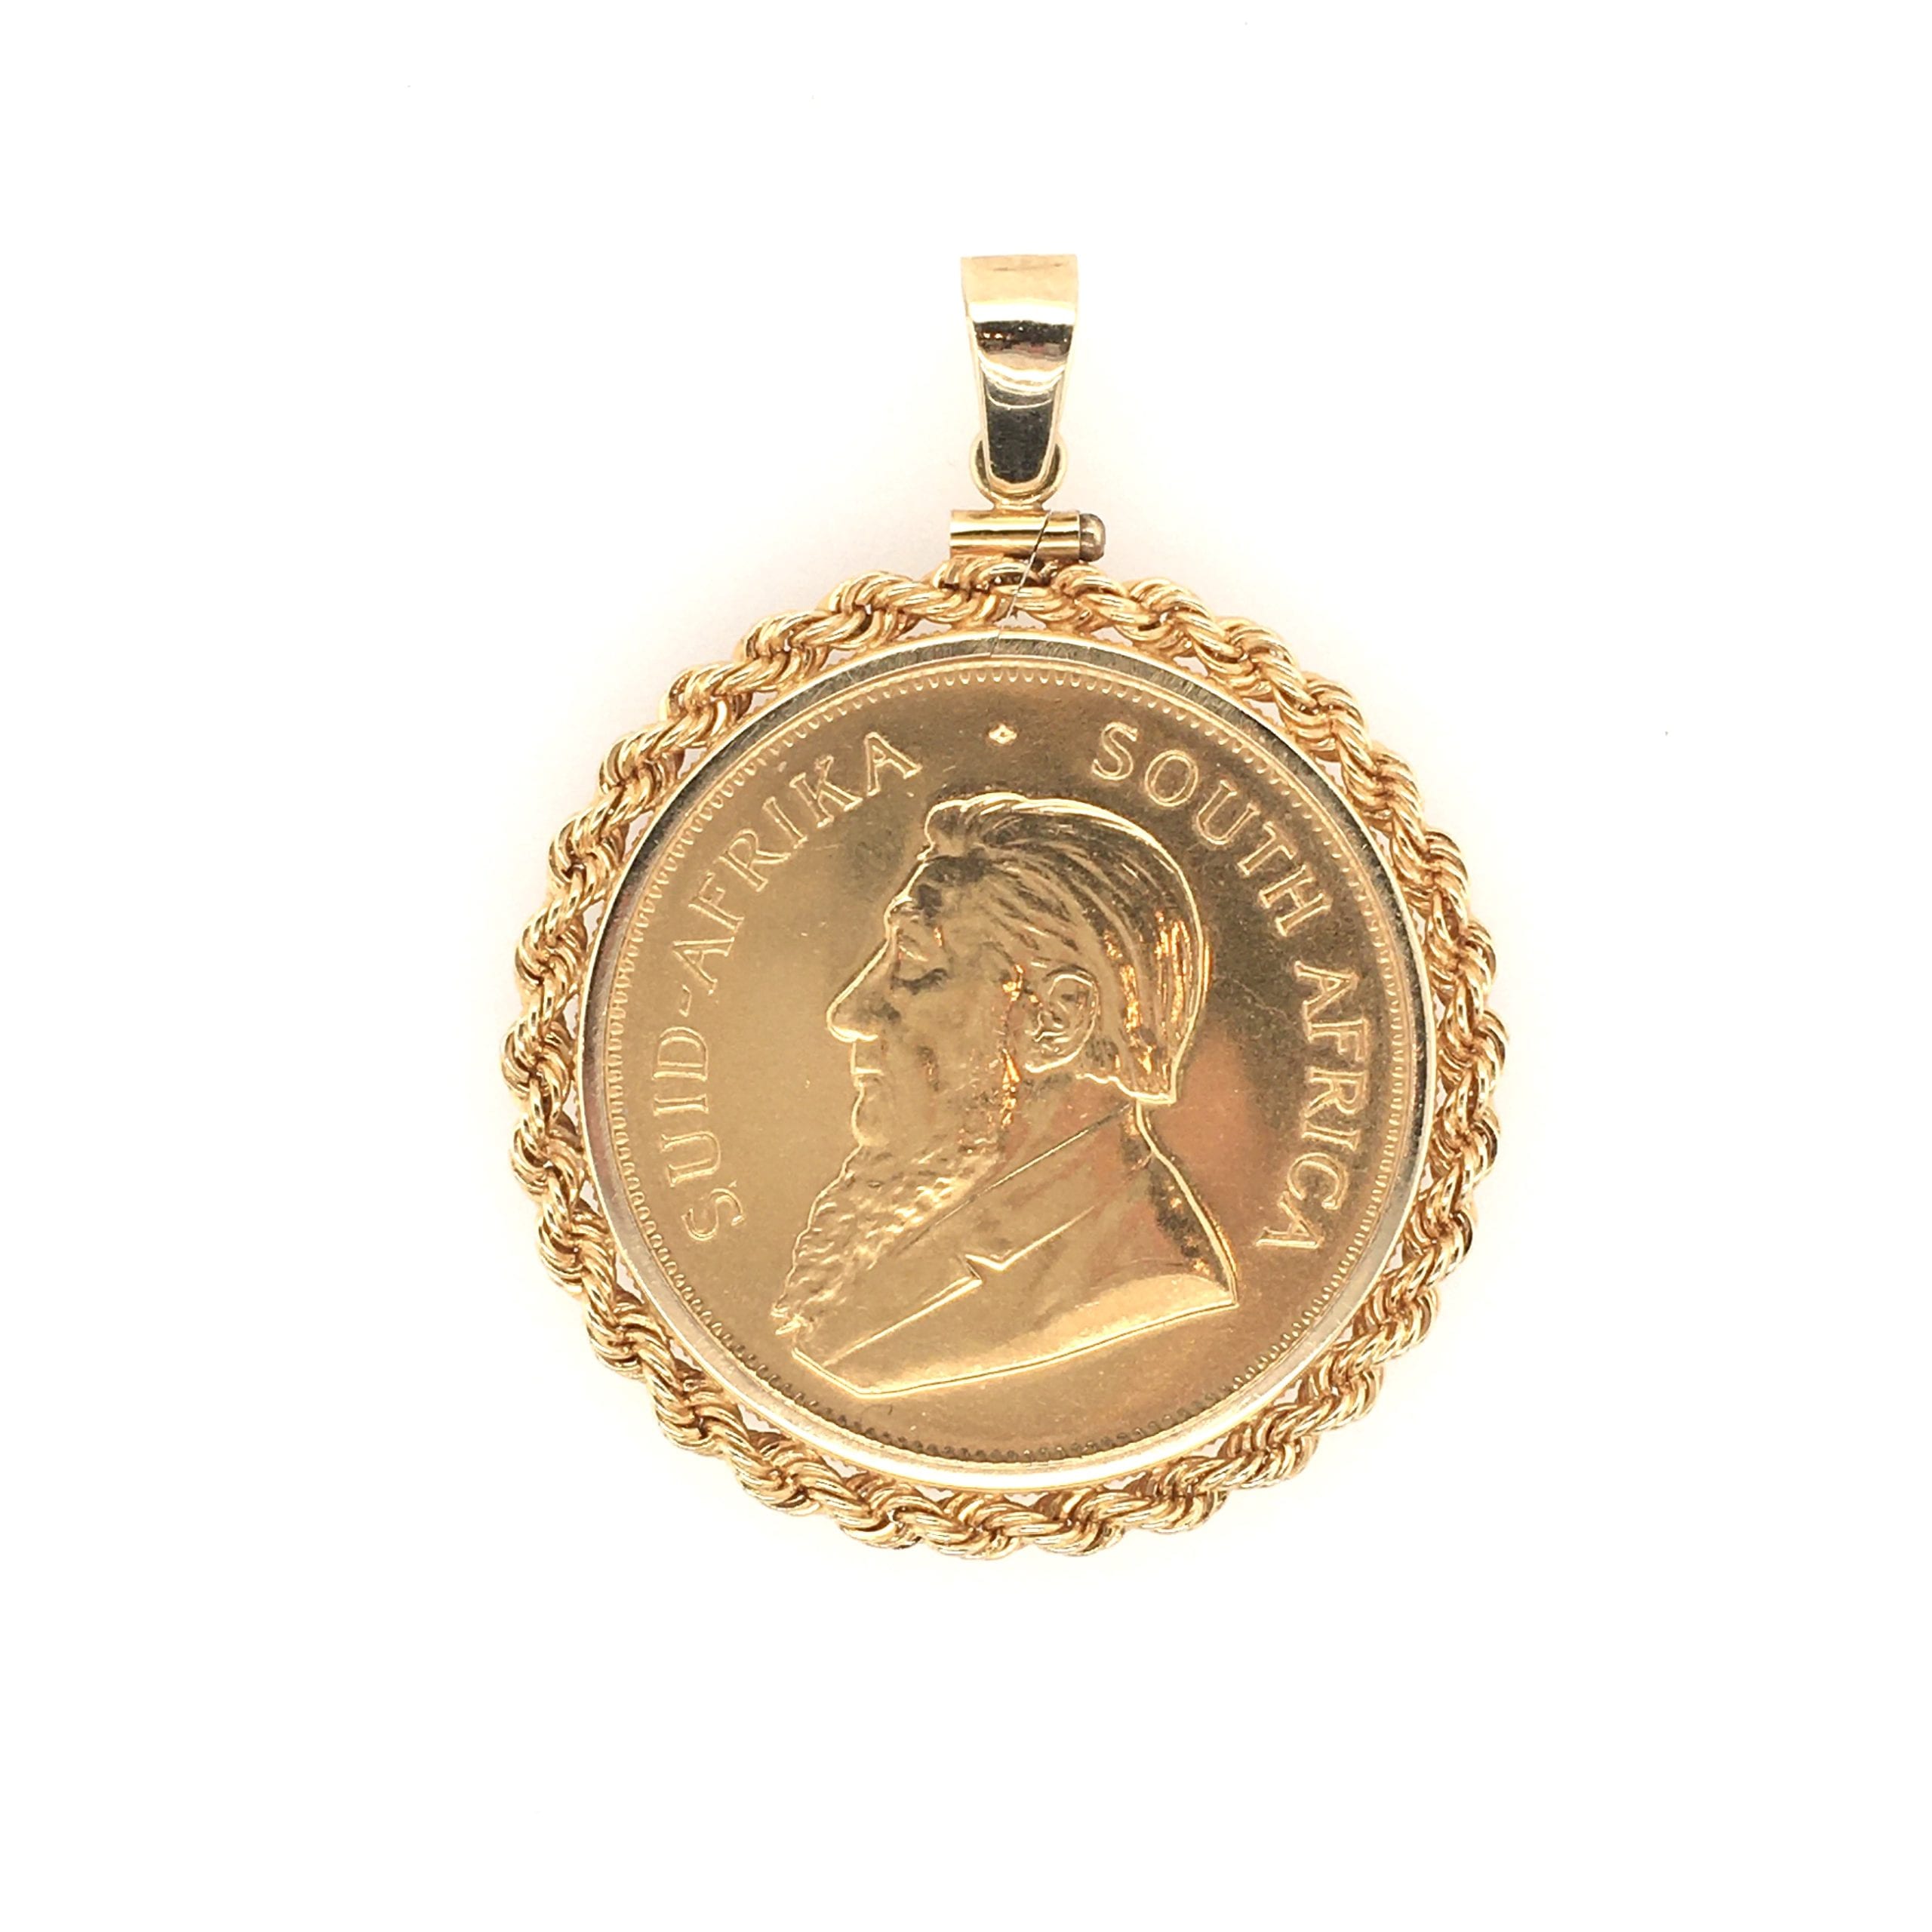 South Africa Coin Necklace Suid 5 Cents Pendant Vintage Custom Made Rare coins Coin Enthusiast Fashion Accessory Handmade in Canada